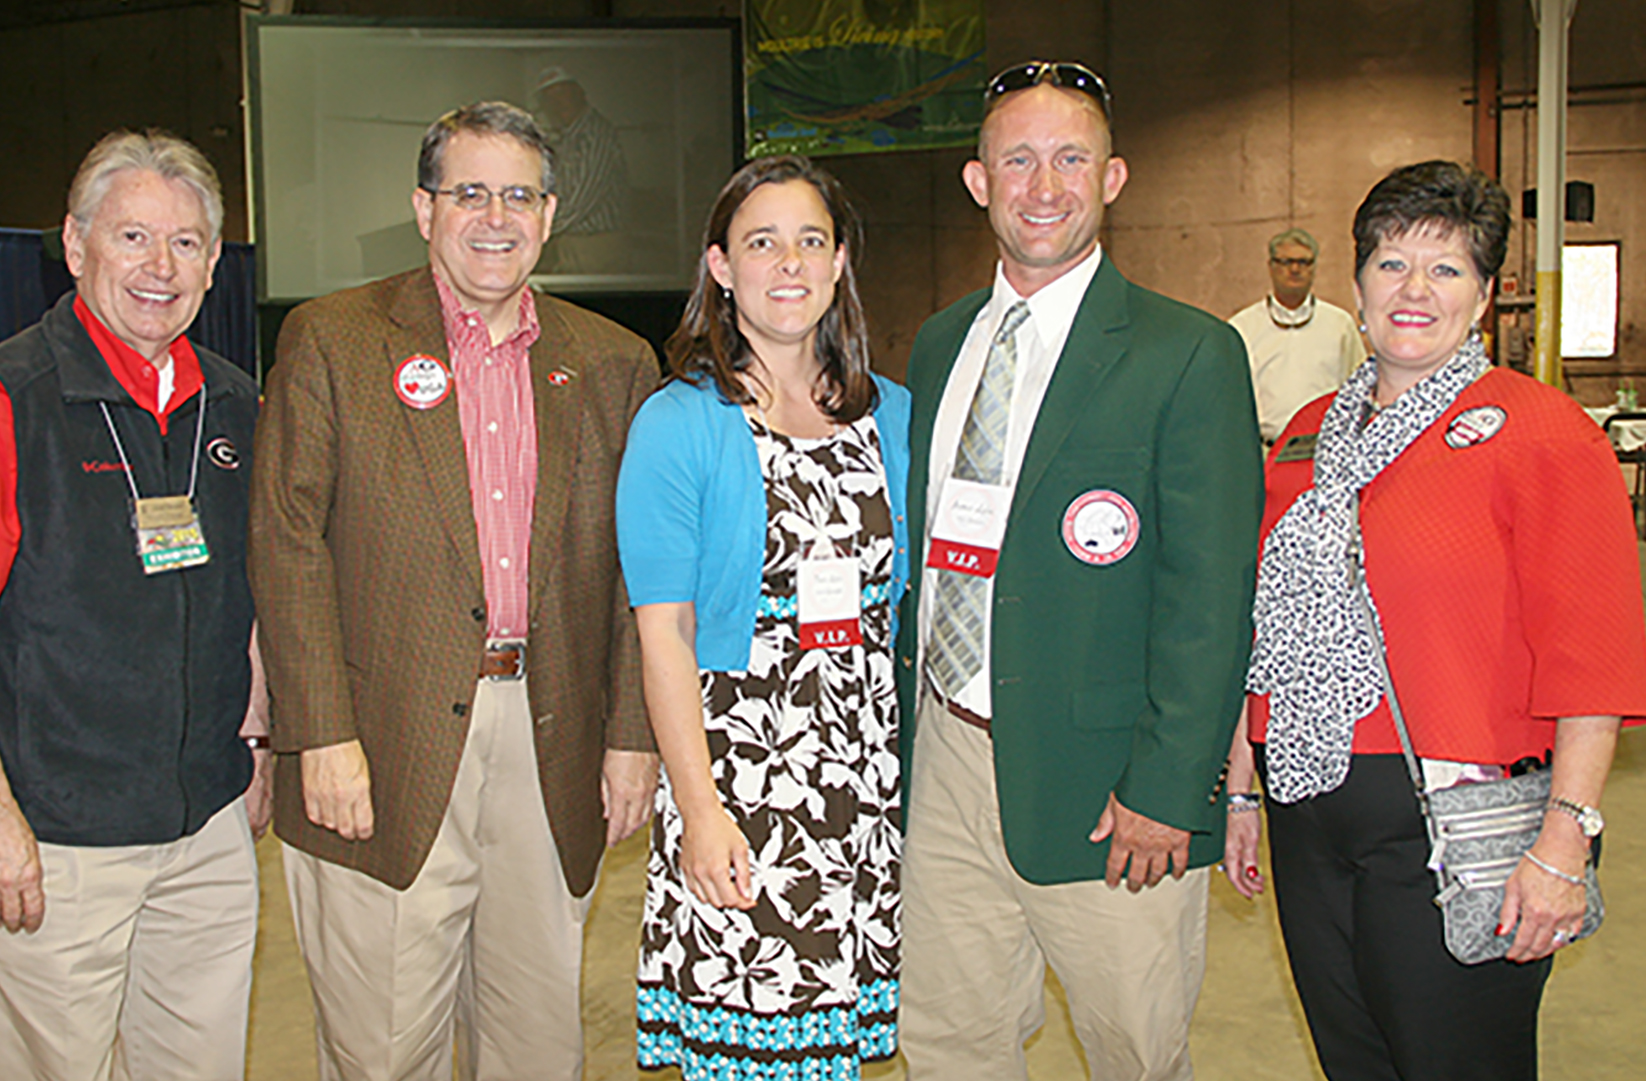 UGA President Jere Morehead poses for a picture with Georgia Farmer of the Year James Lyles and wife, Tara, during Tuesday's Farmer of the Year luncheon. Also pictured are Josef Broder, interim dean of the UGA CAES, and Laura Perry Johnson, associate dean for Extension.